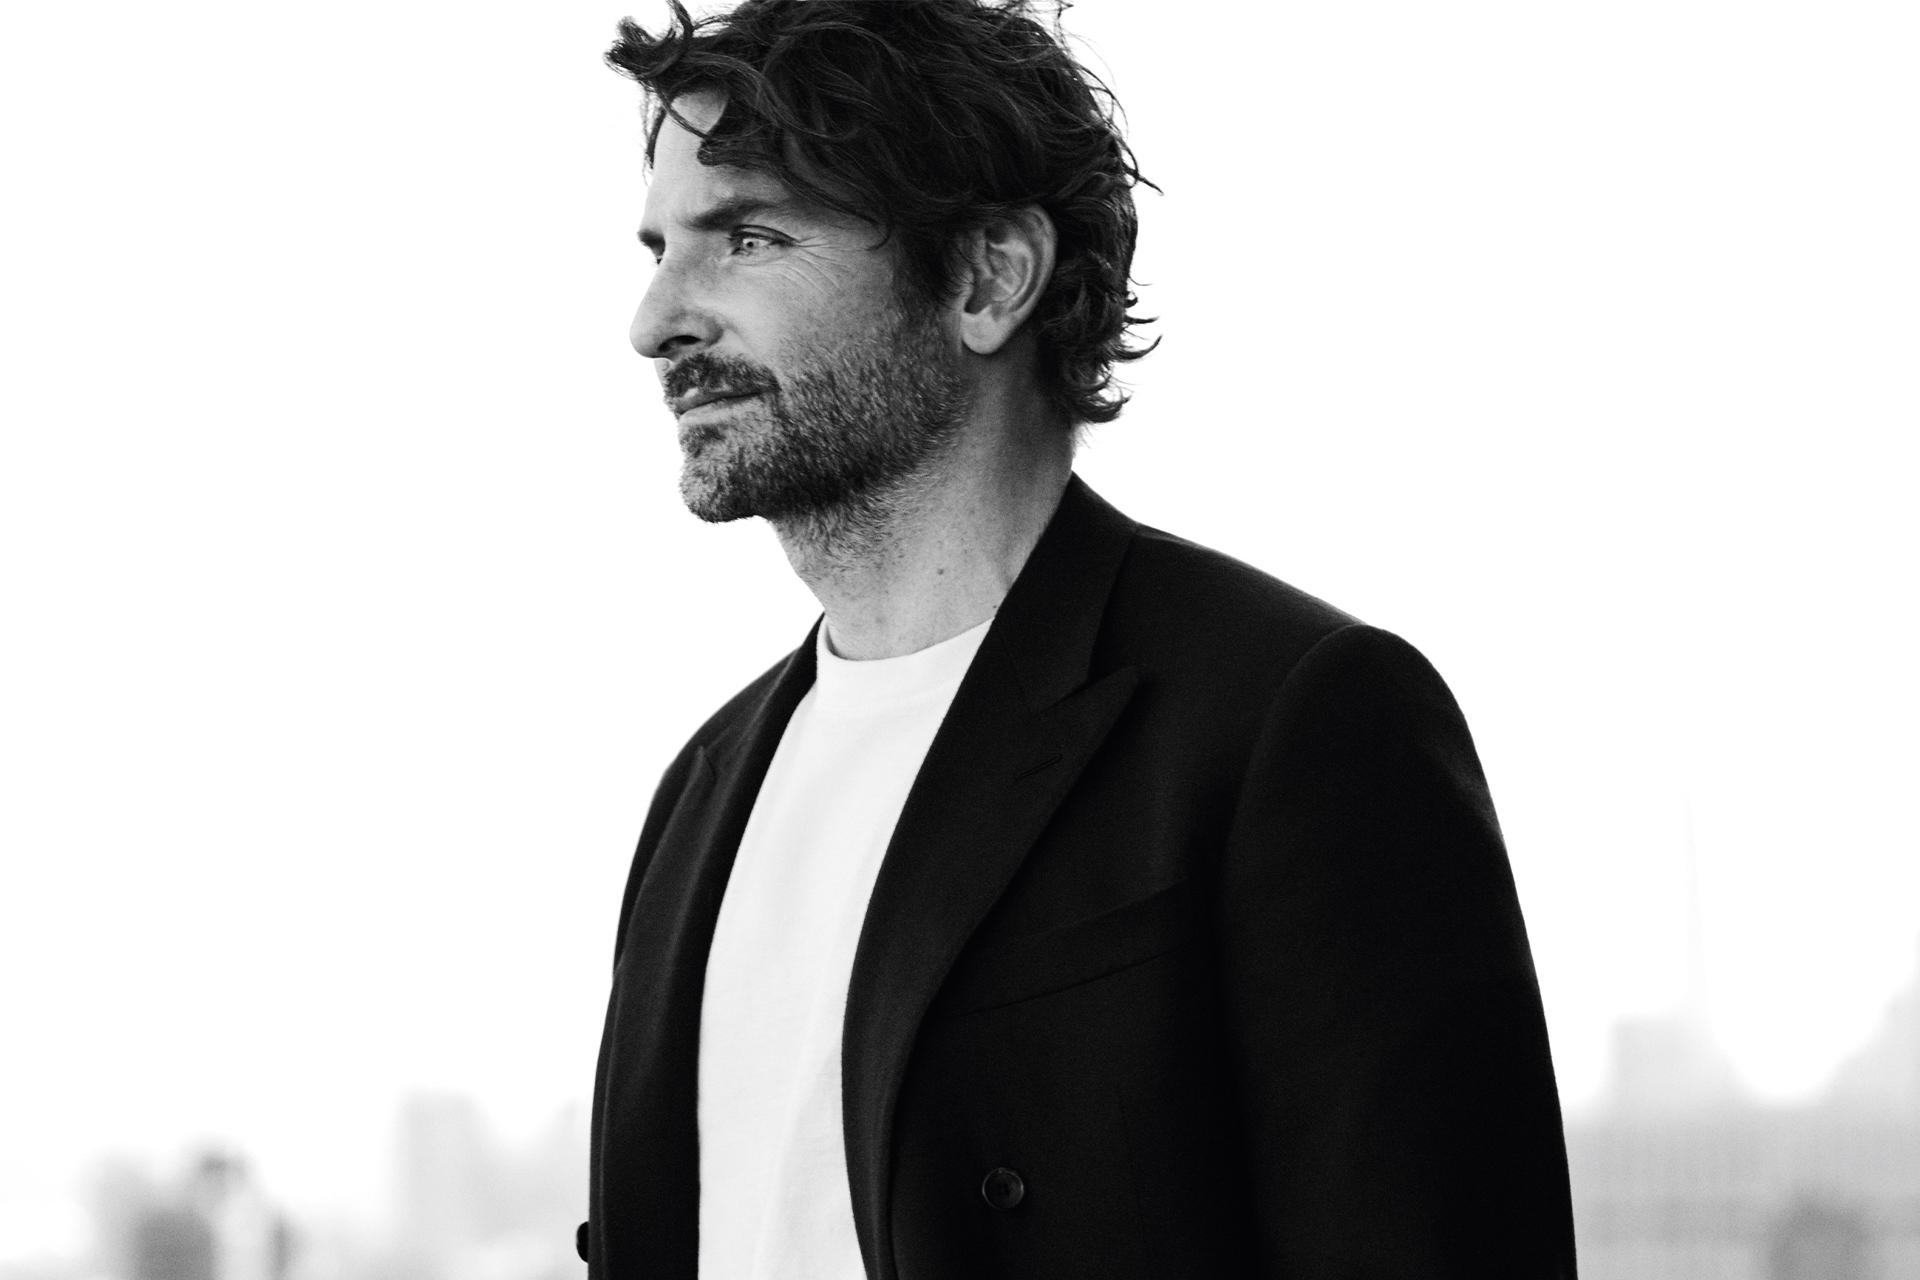 Bradley Cooper is the New Face of Louis Vuitton's Tambour